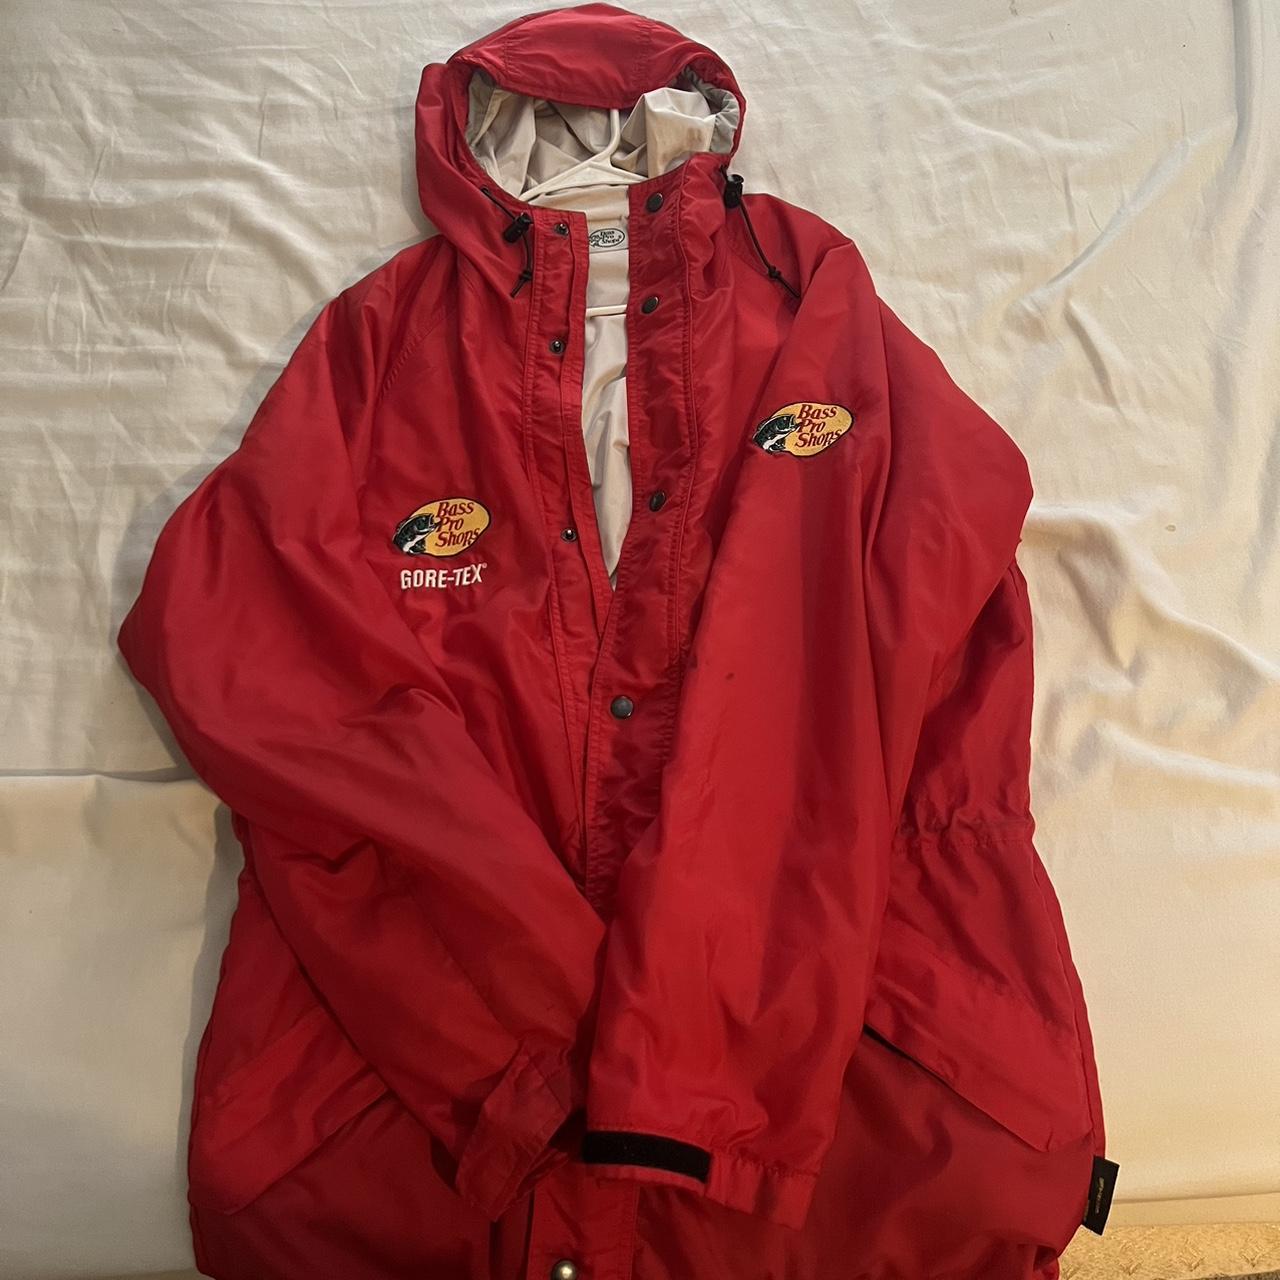 Men's Red and Yellow Jacket | Depop